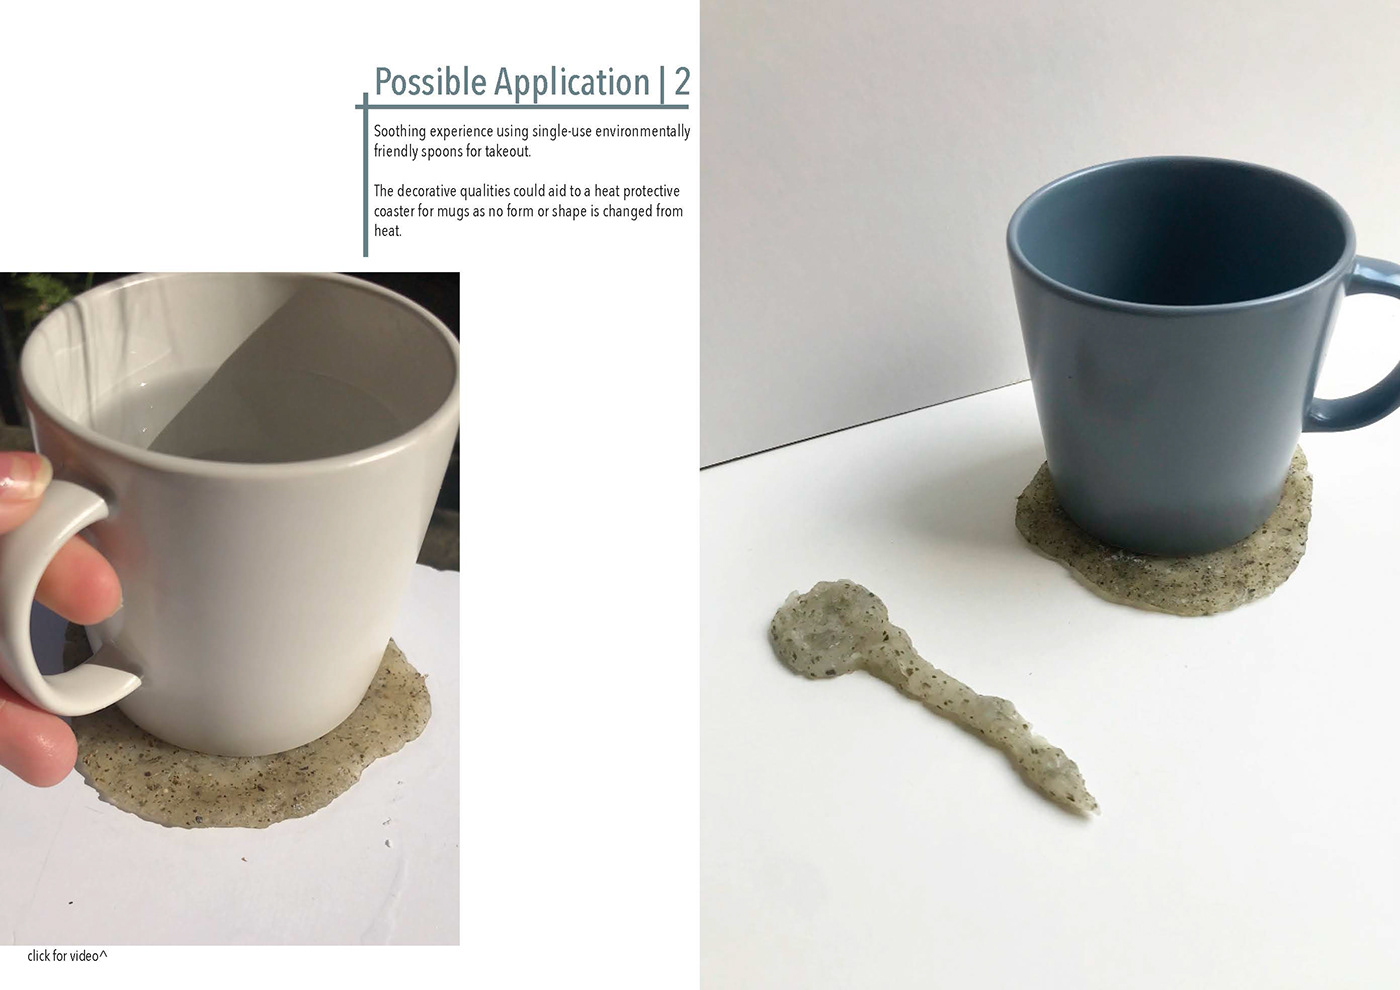 biodegradable bioplastic innovation materialexploration product design  Product innovation recycle Sustainable teabgas upcycling